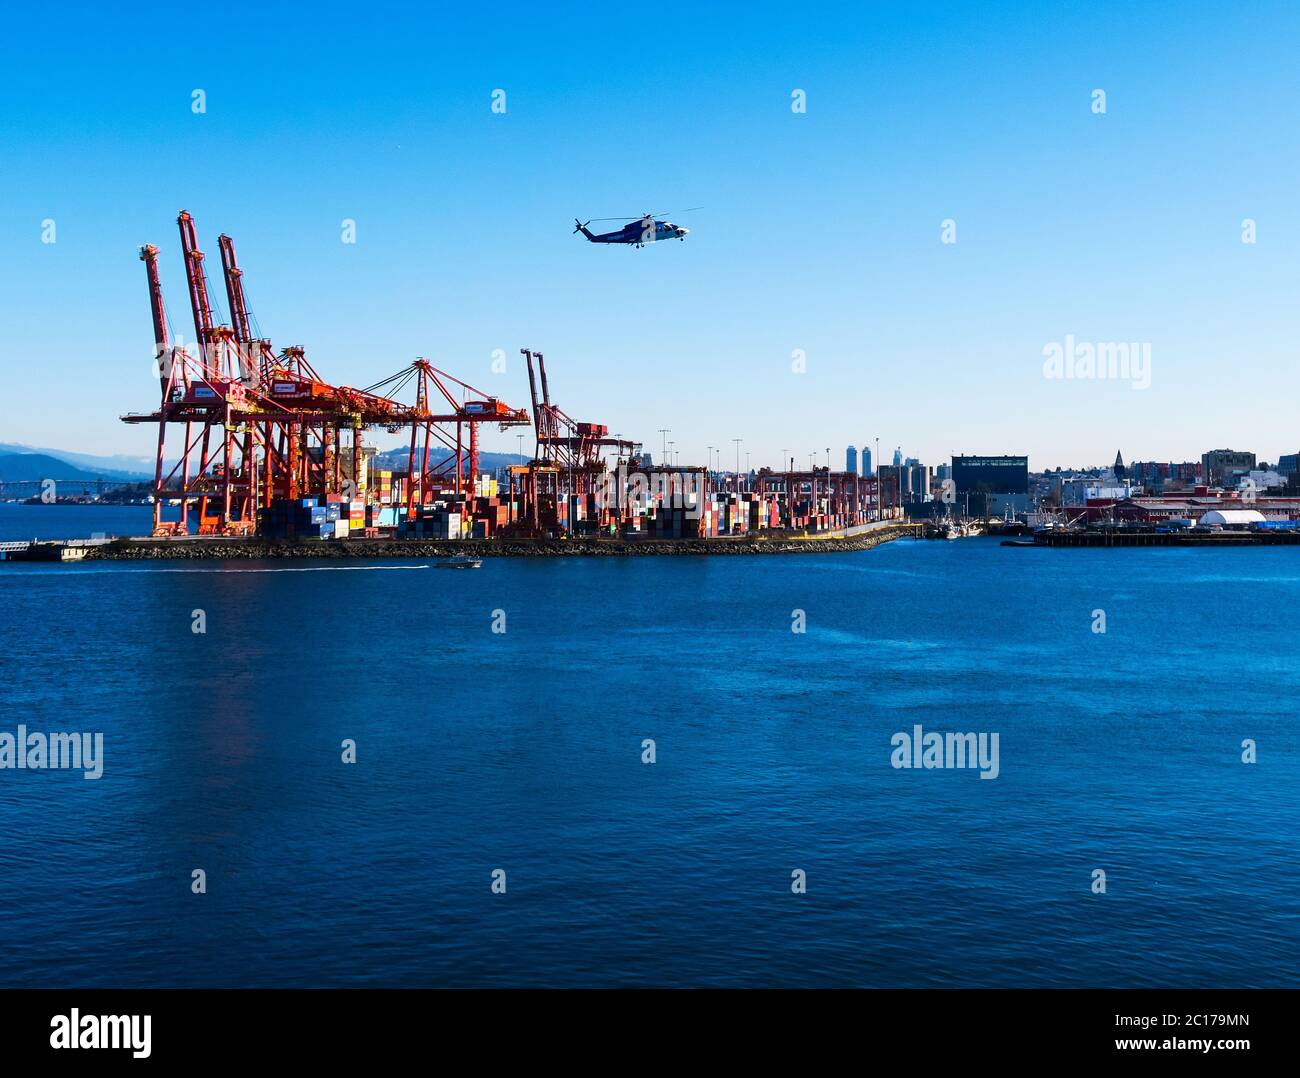 Helicopter flying over Vancouver docks. Stock Photo